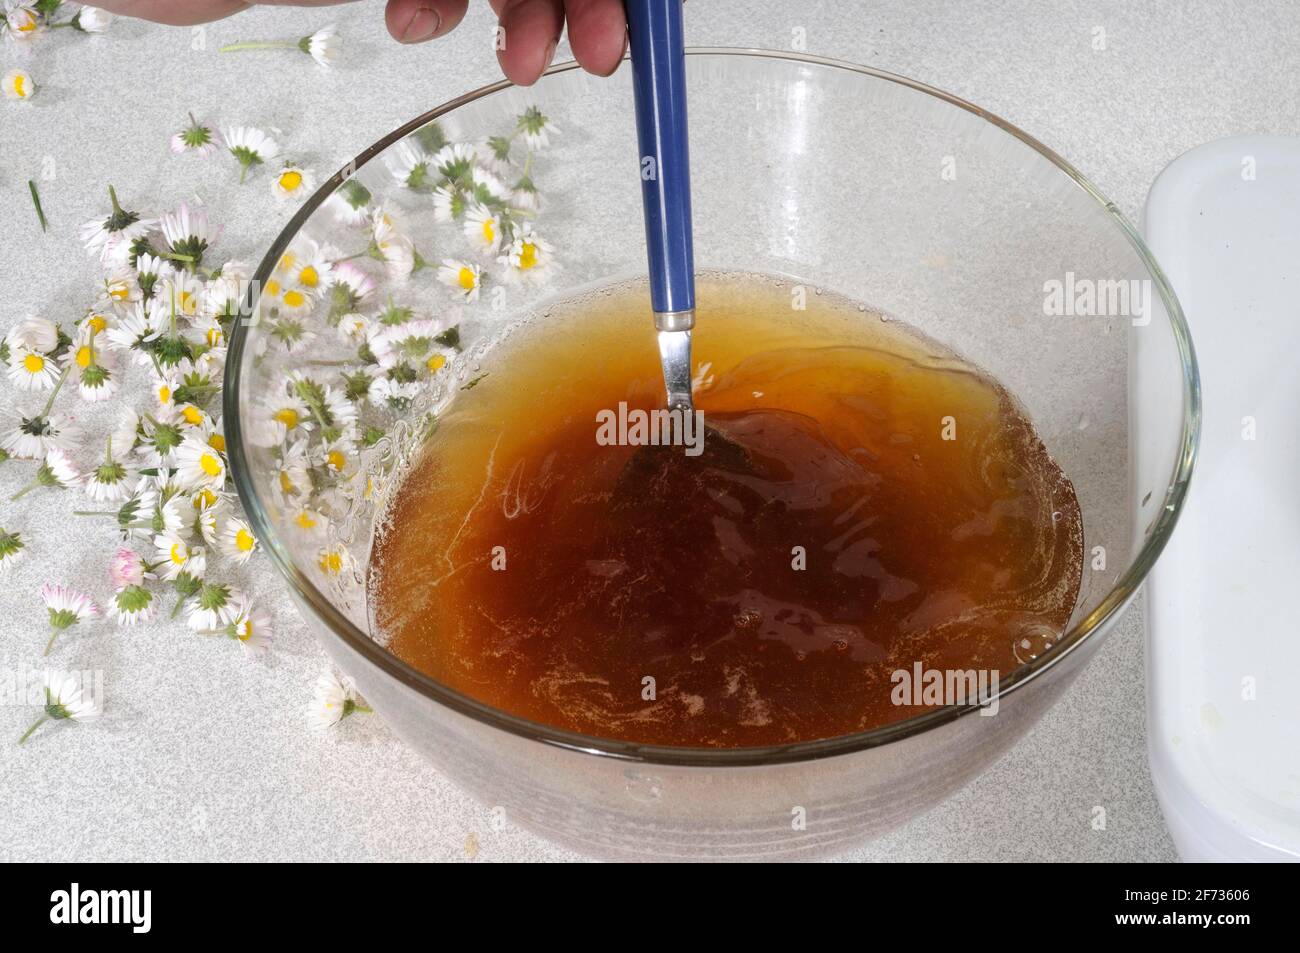 Production of daisy syrup (Bellis perennis), daisy syrup, daisies, daisies, made-to-measure daisies, thousand daisies Stock Photo